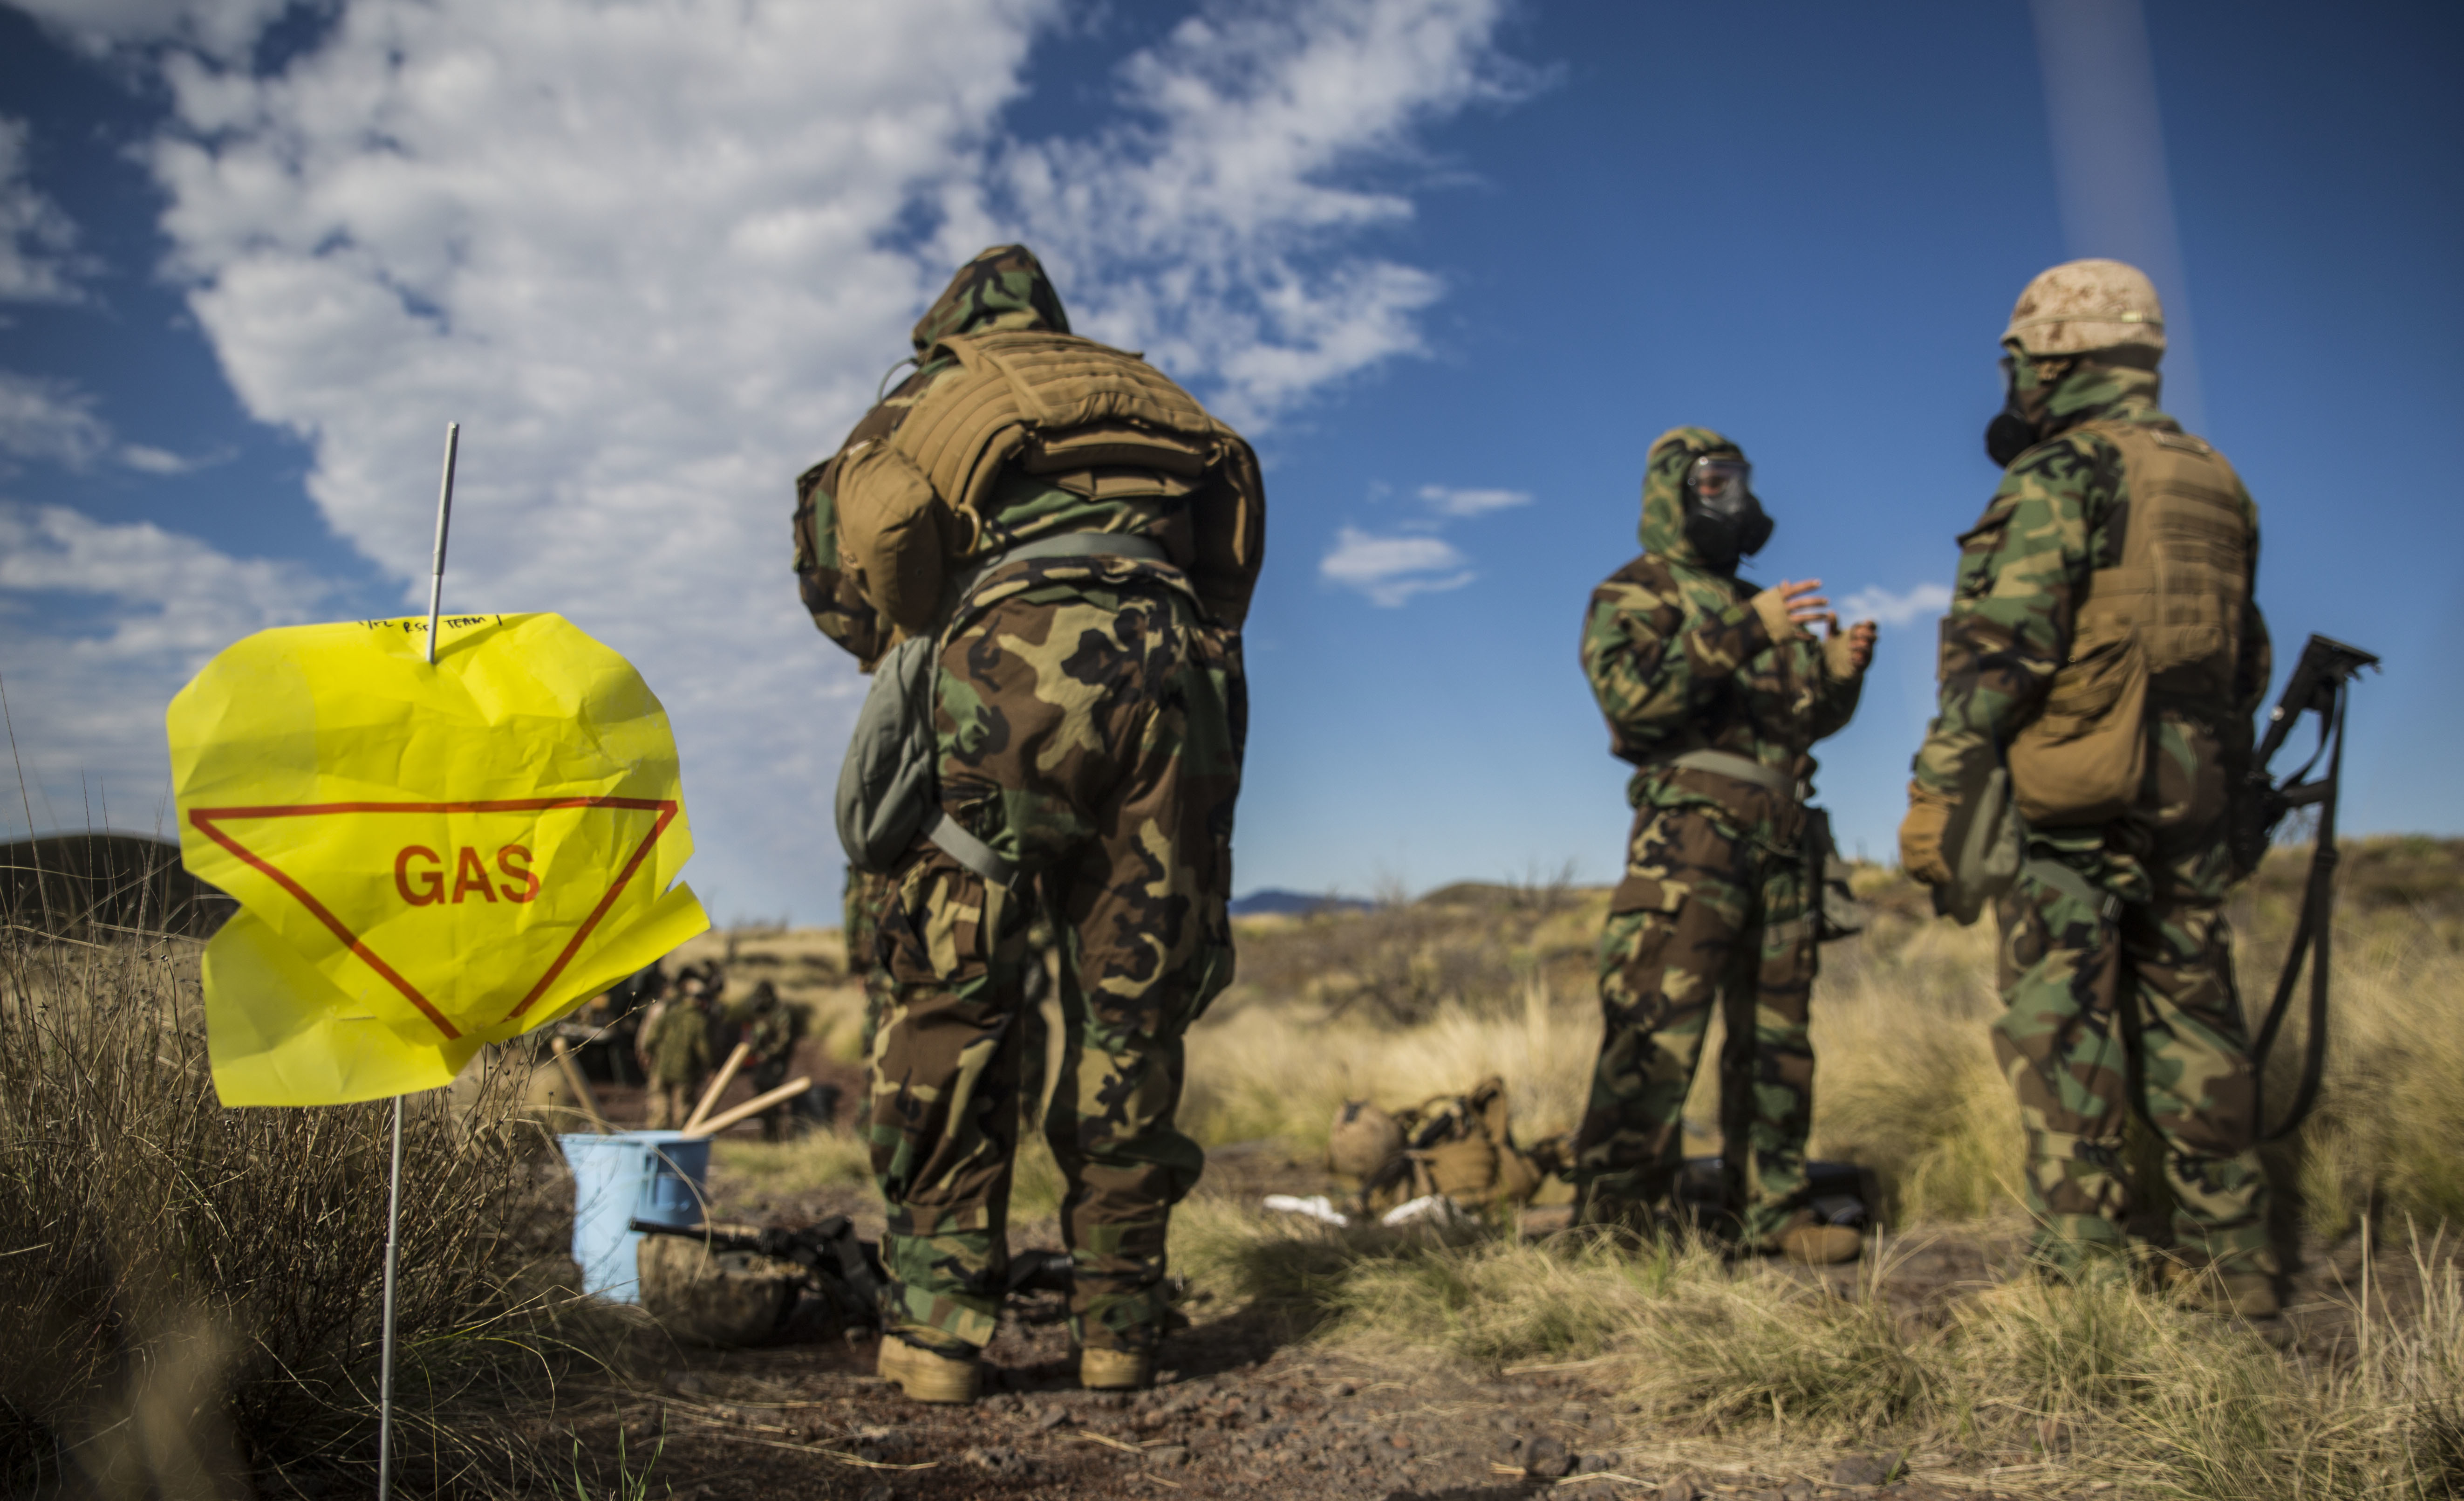 Marines participate in an exercise involving gas.